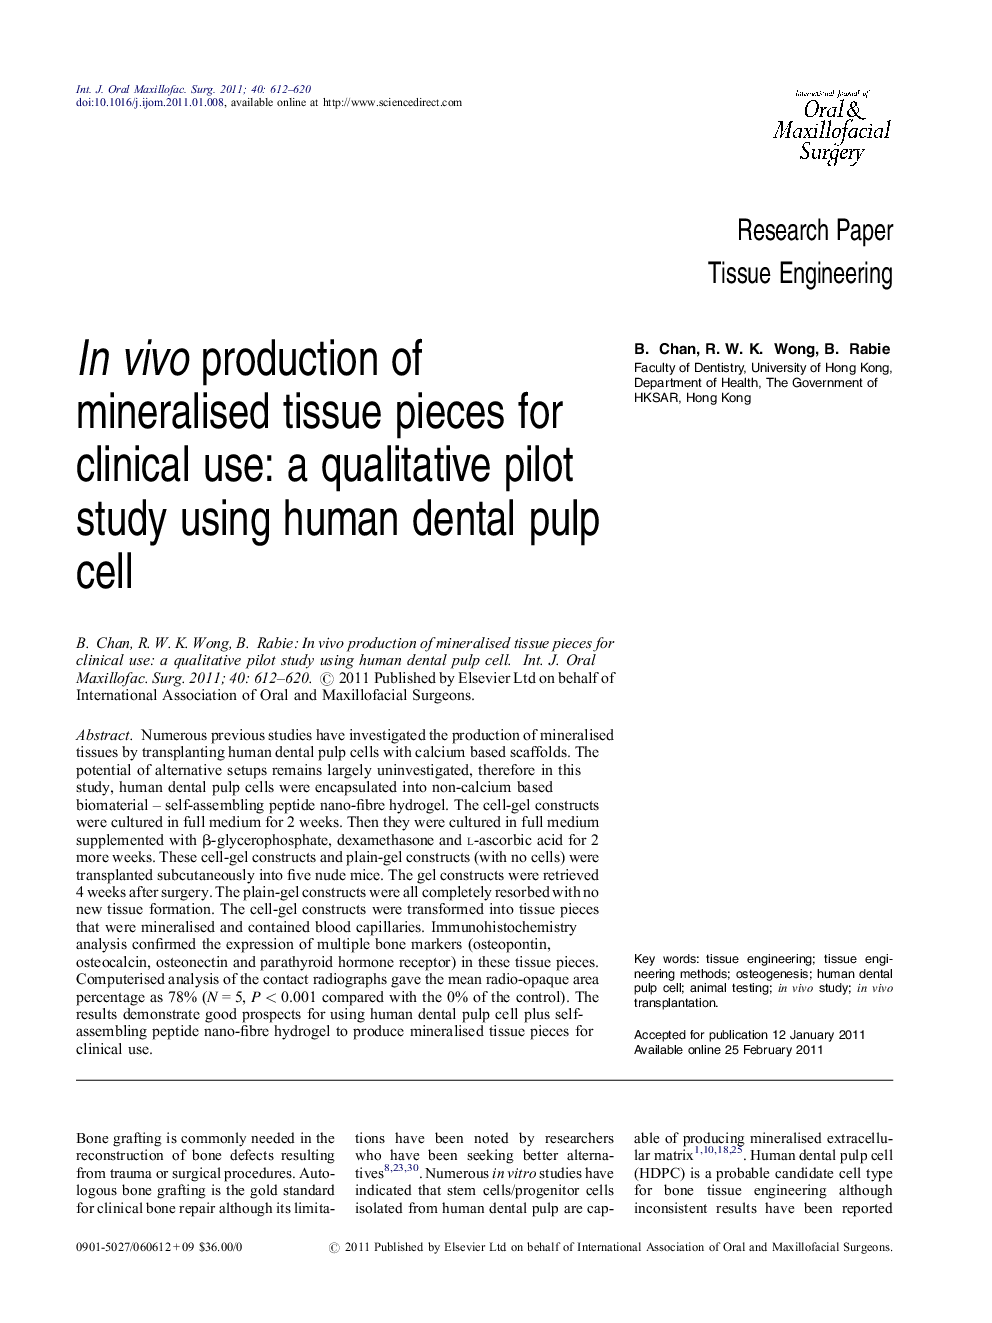 In vivo production of mineralised tissue pieces for clinical use: a qualitative pilot study using human dental pulp cell